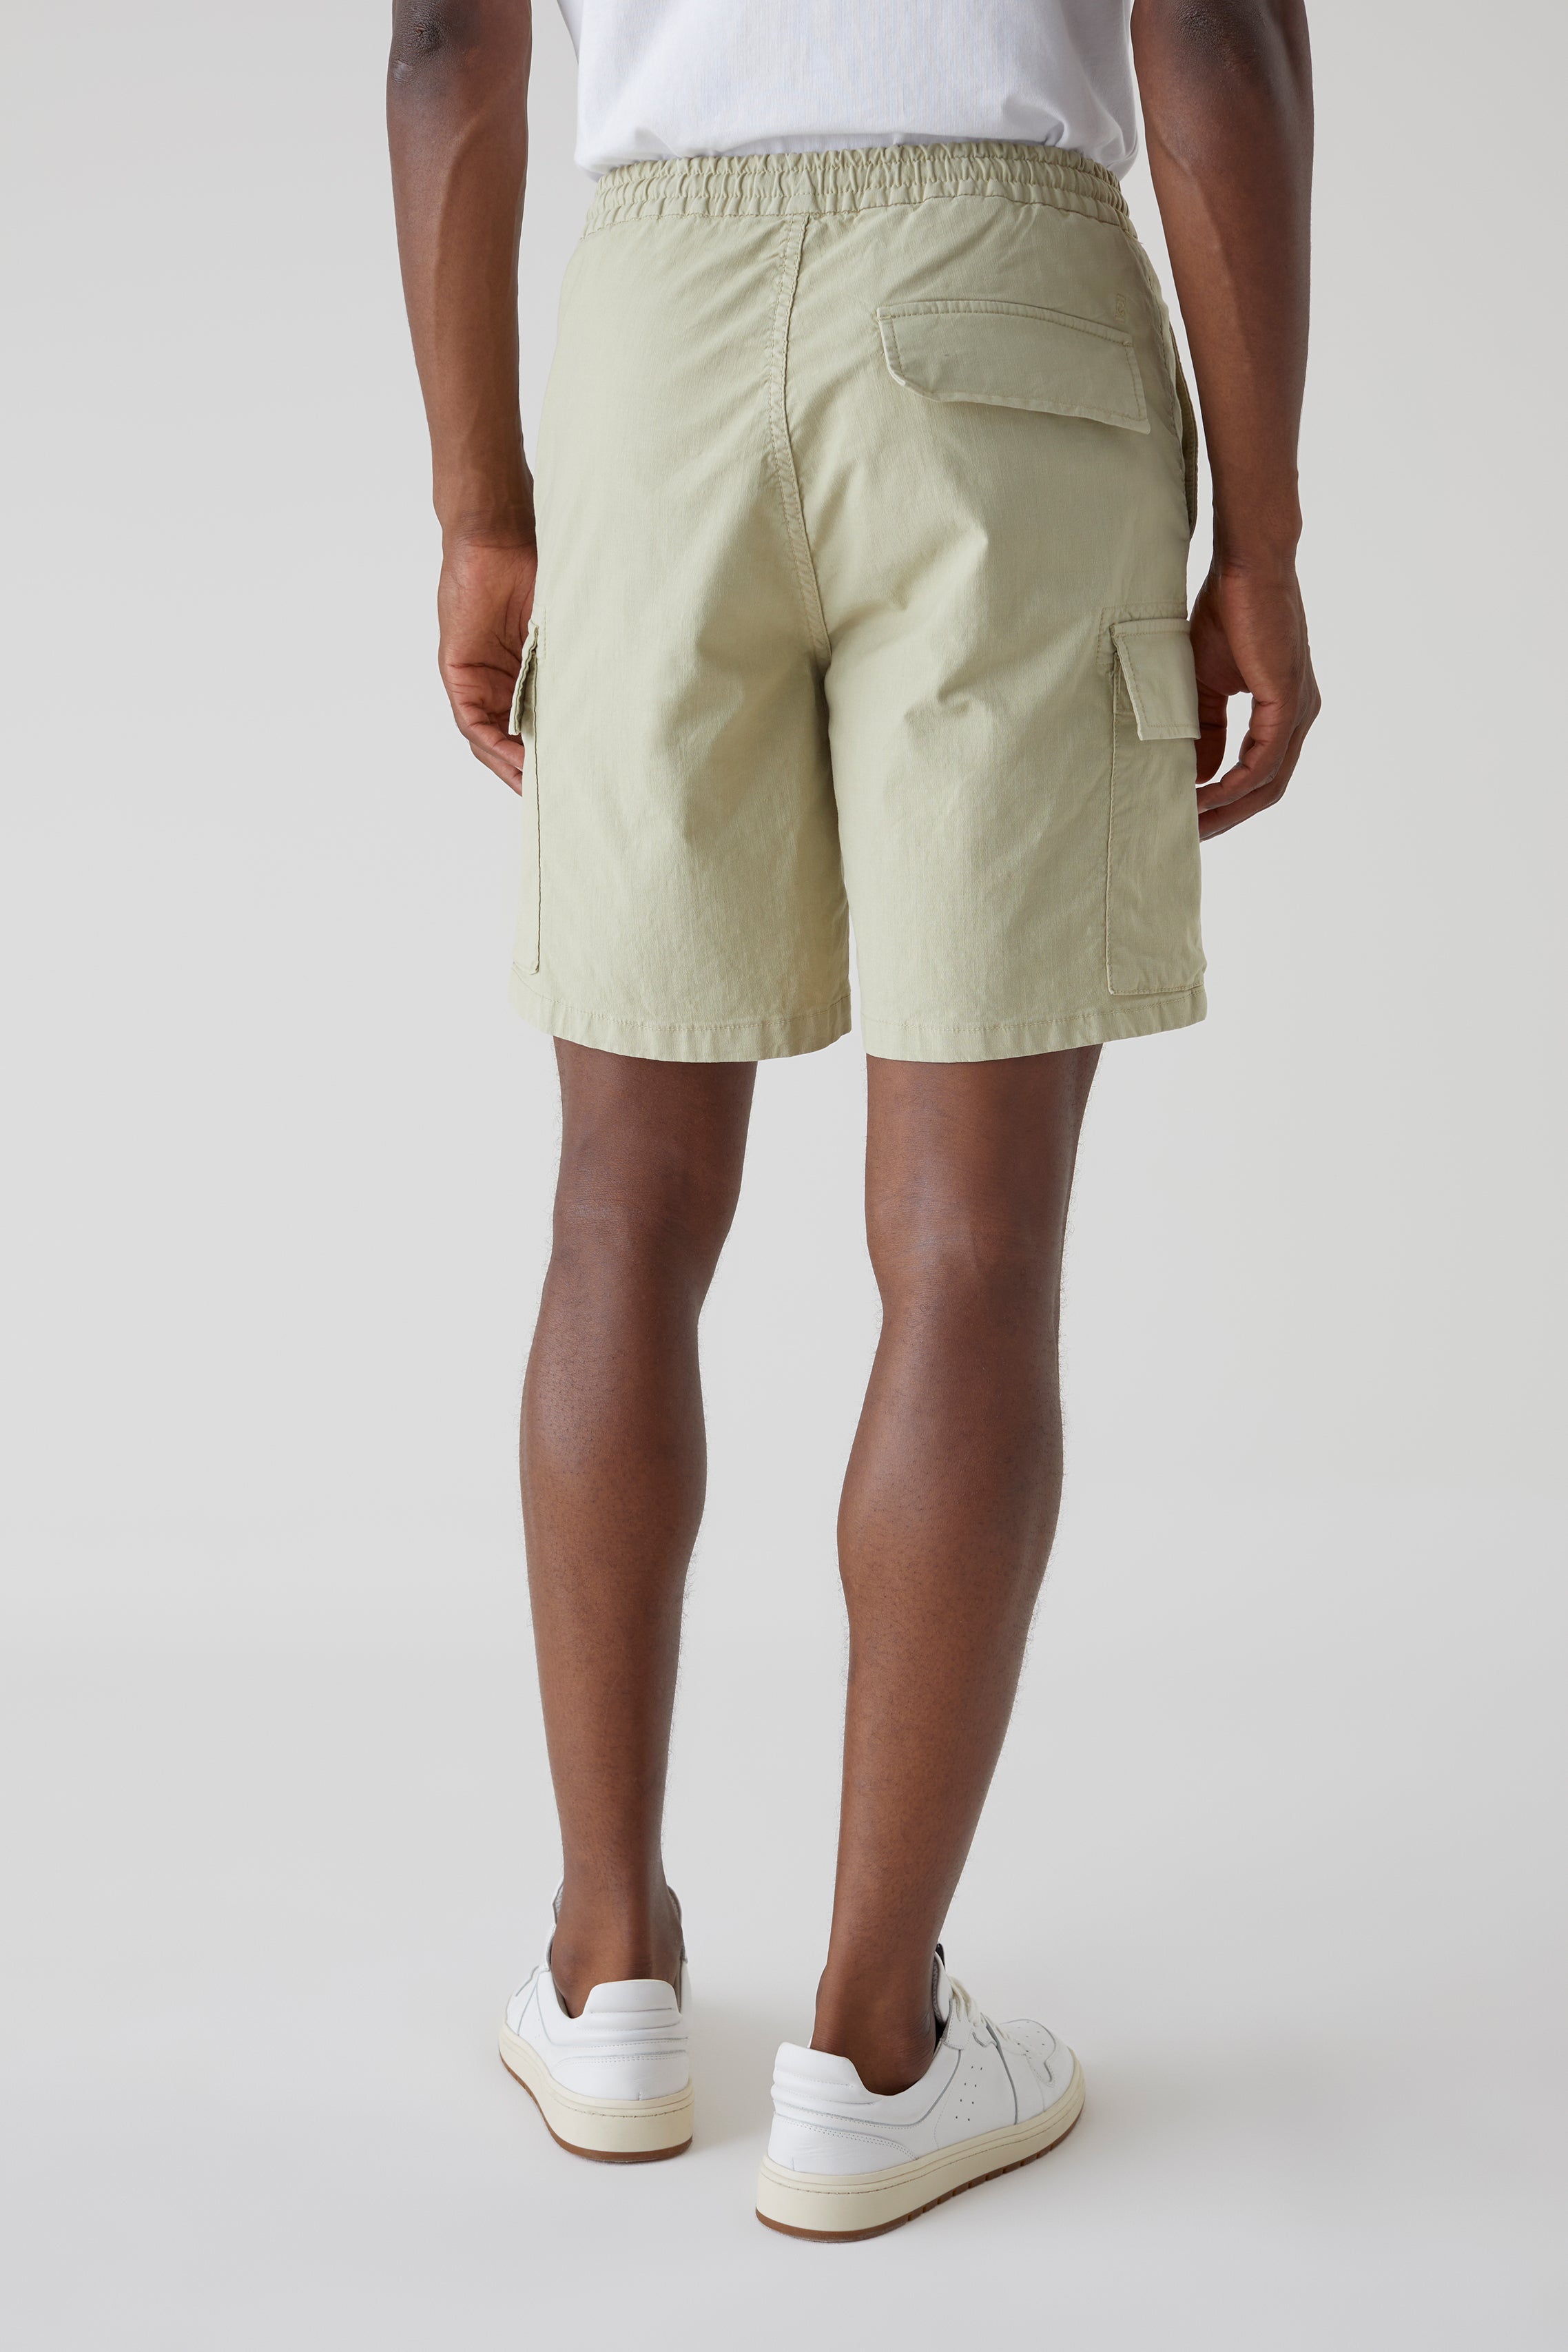 CLOSED-OUTLET-SALE-DRAWSTRING-CARGO-SHORTS-Hosen-ARCHIVE-COLLECTION-4.jpg